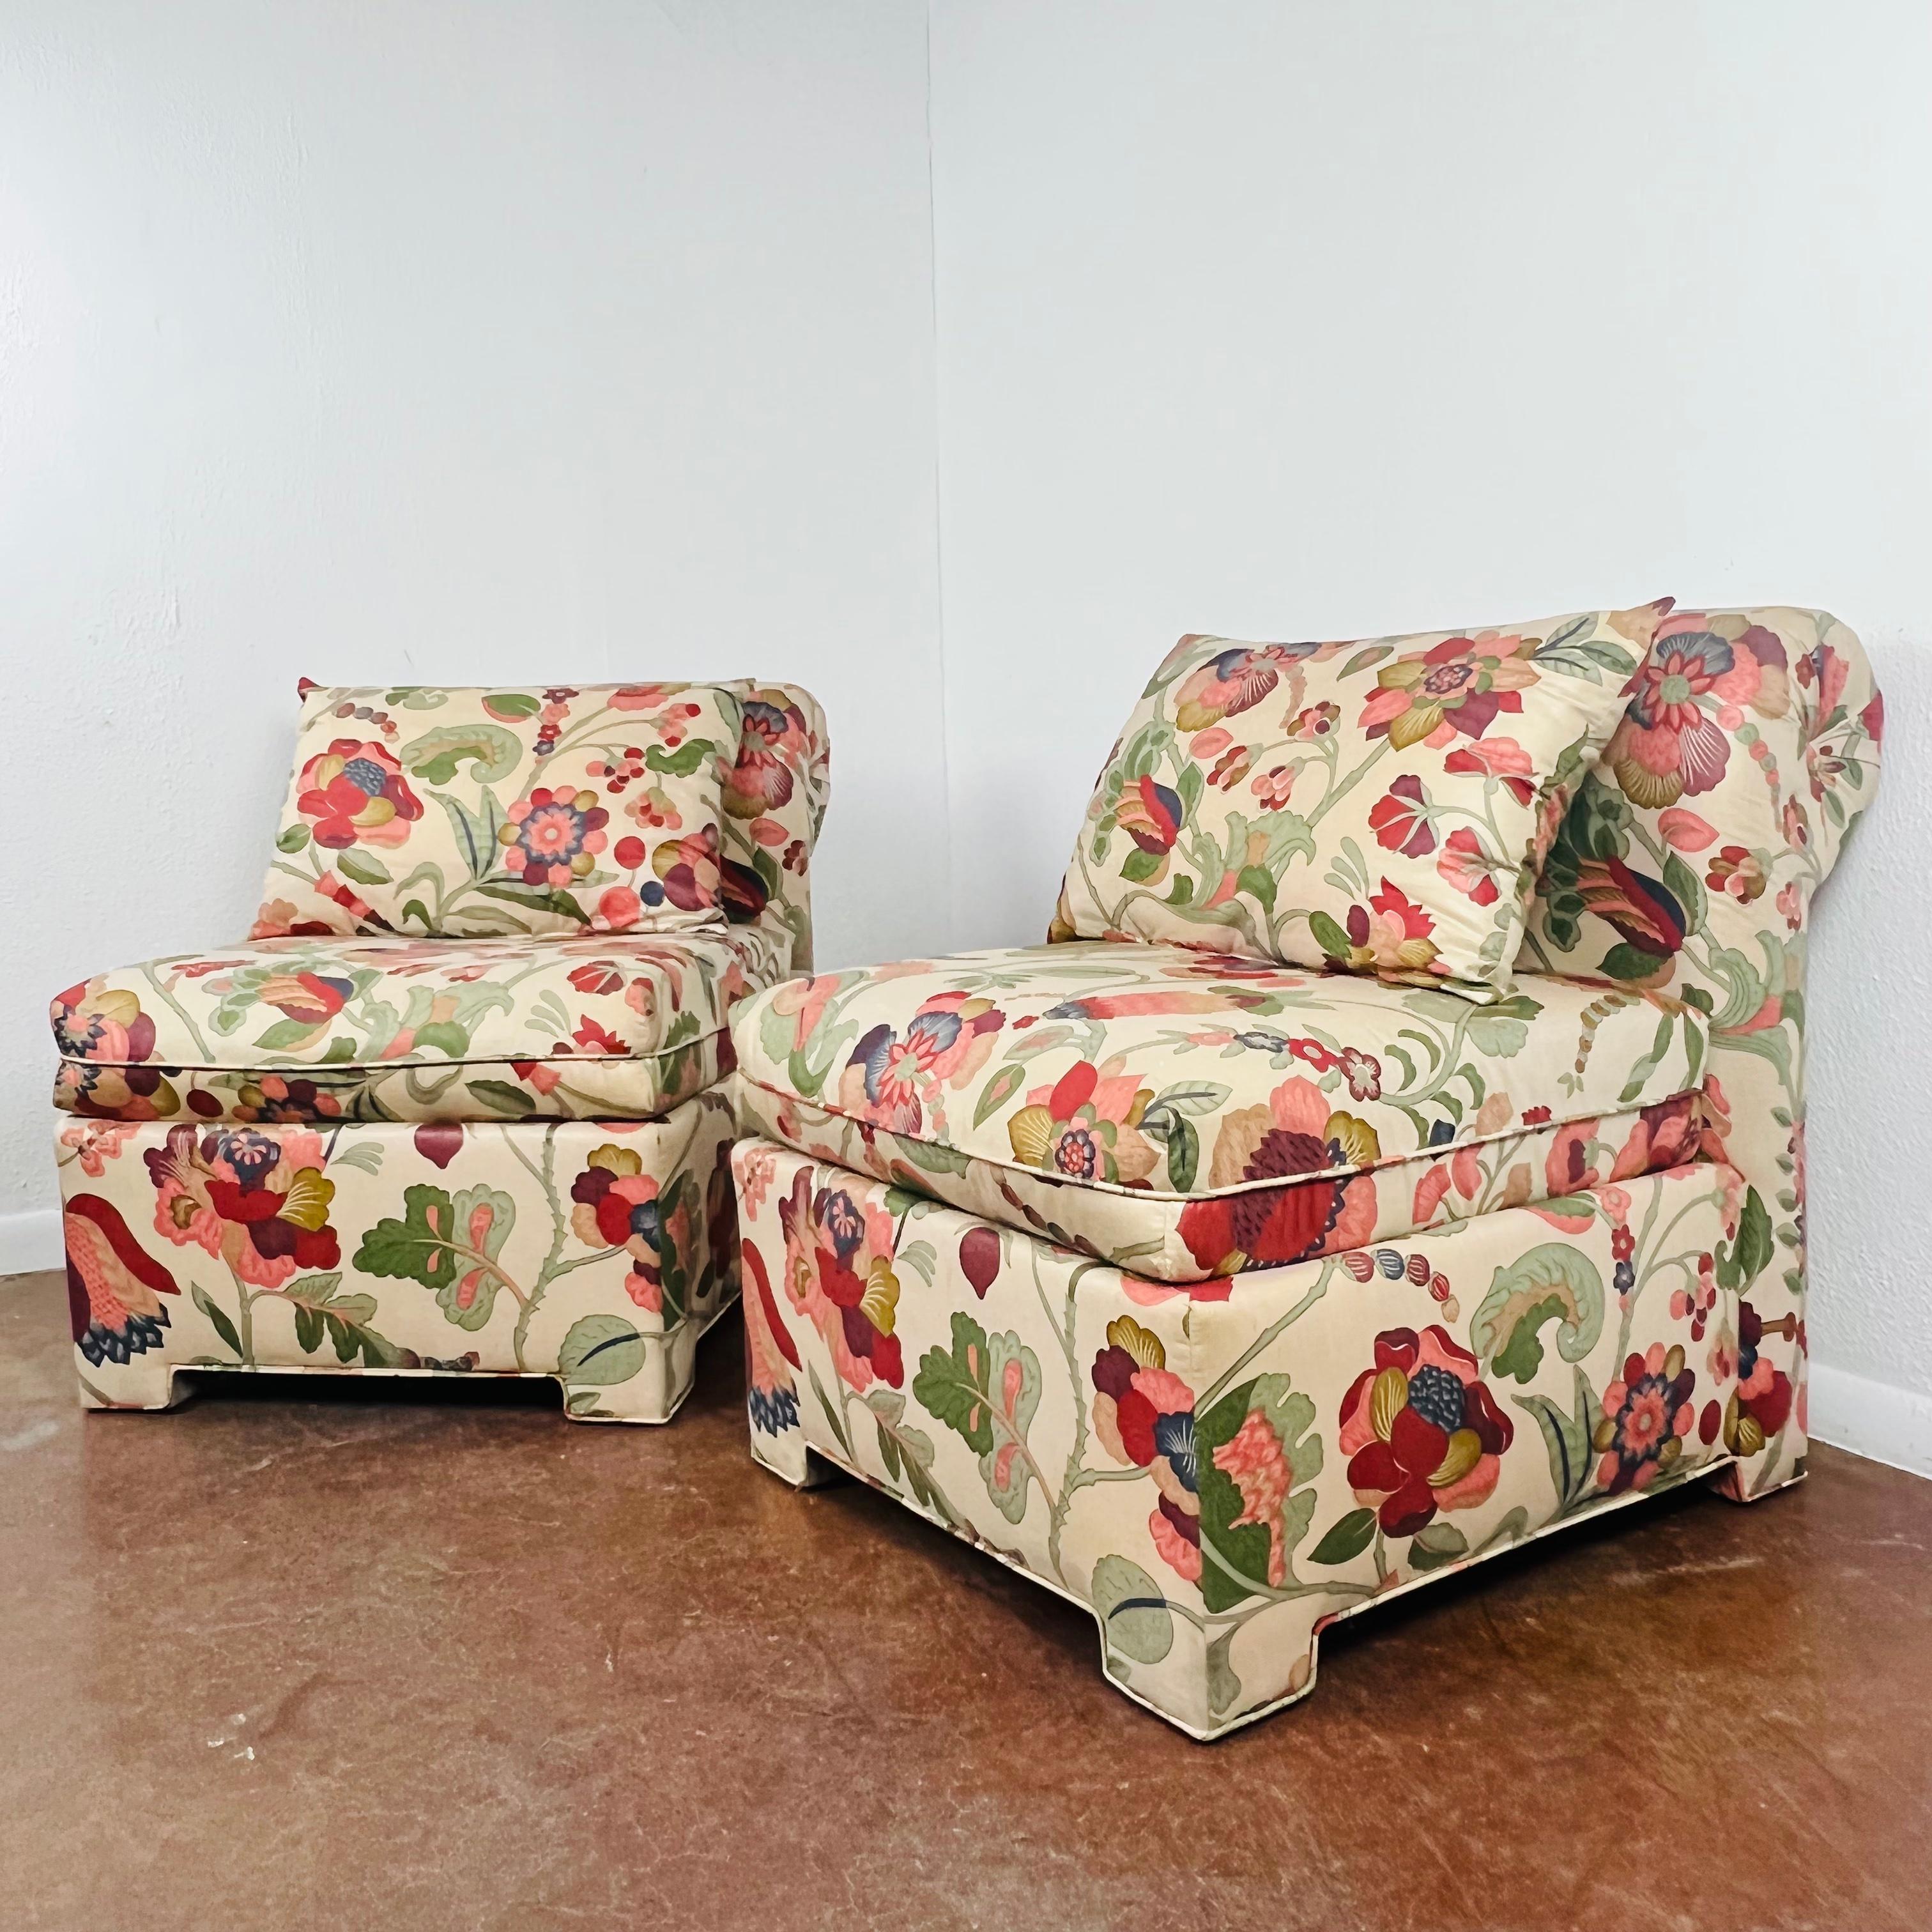 Darling pair of petite rollback slipper chairs with squared block legs in the style of Billy Baldwin. Removable seat and back cushions. Reupholstery is recommended.